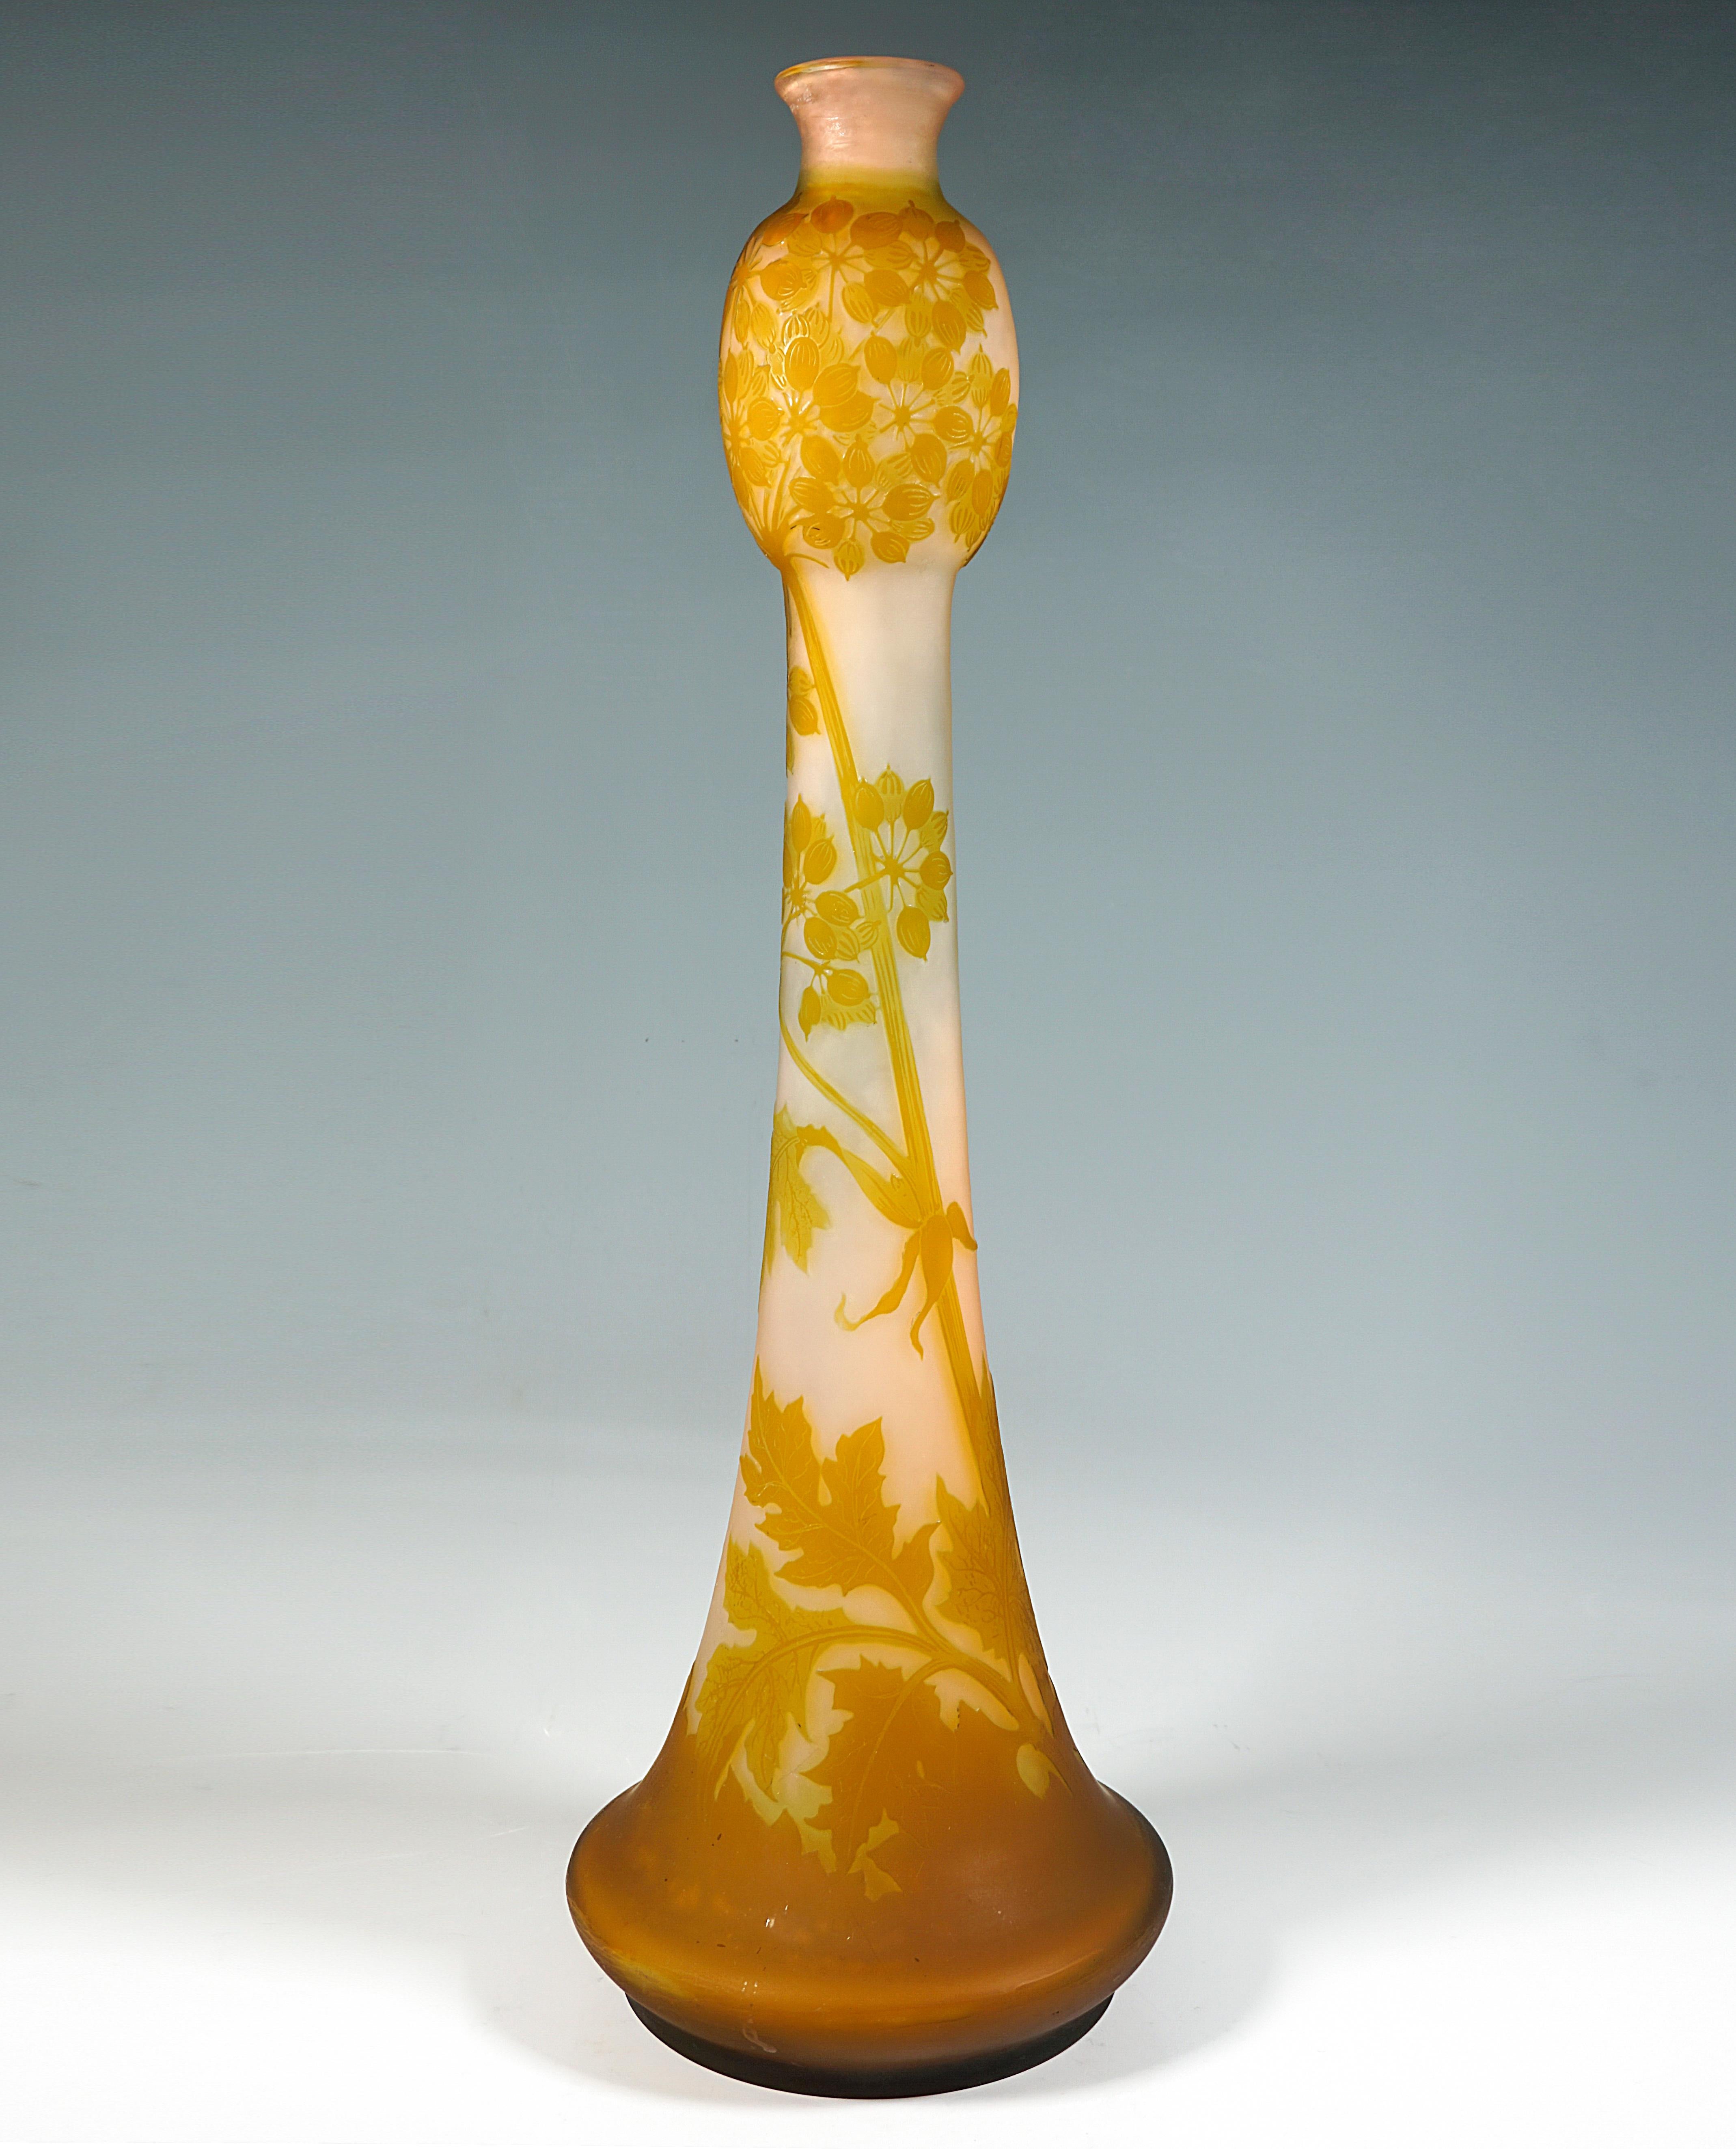 Large Émile Gallé Art Nouveau Cameo Vase, Umbellifers Decor, France, circa 1904 In Good Condition For Sale In Vienna, AT